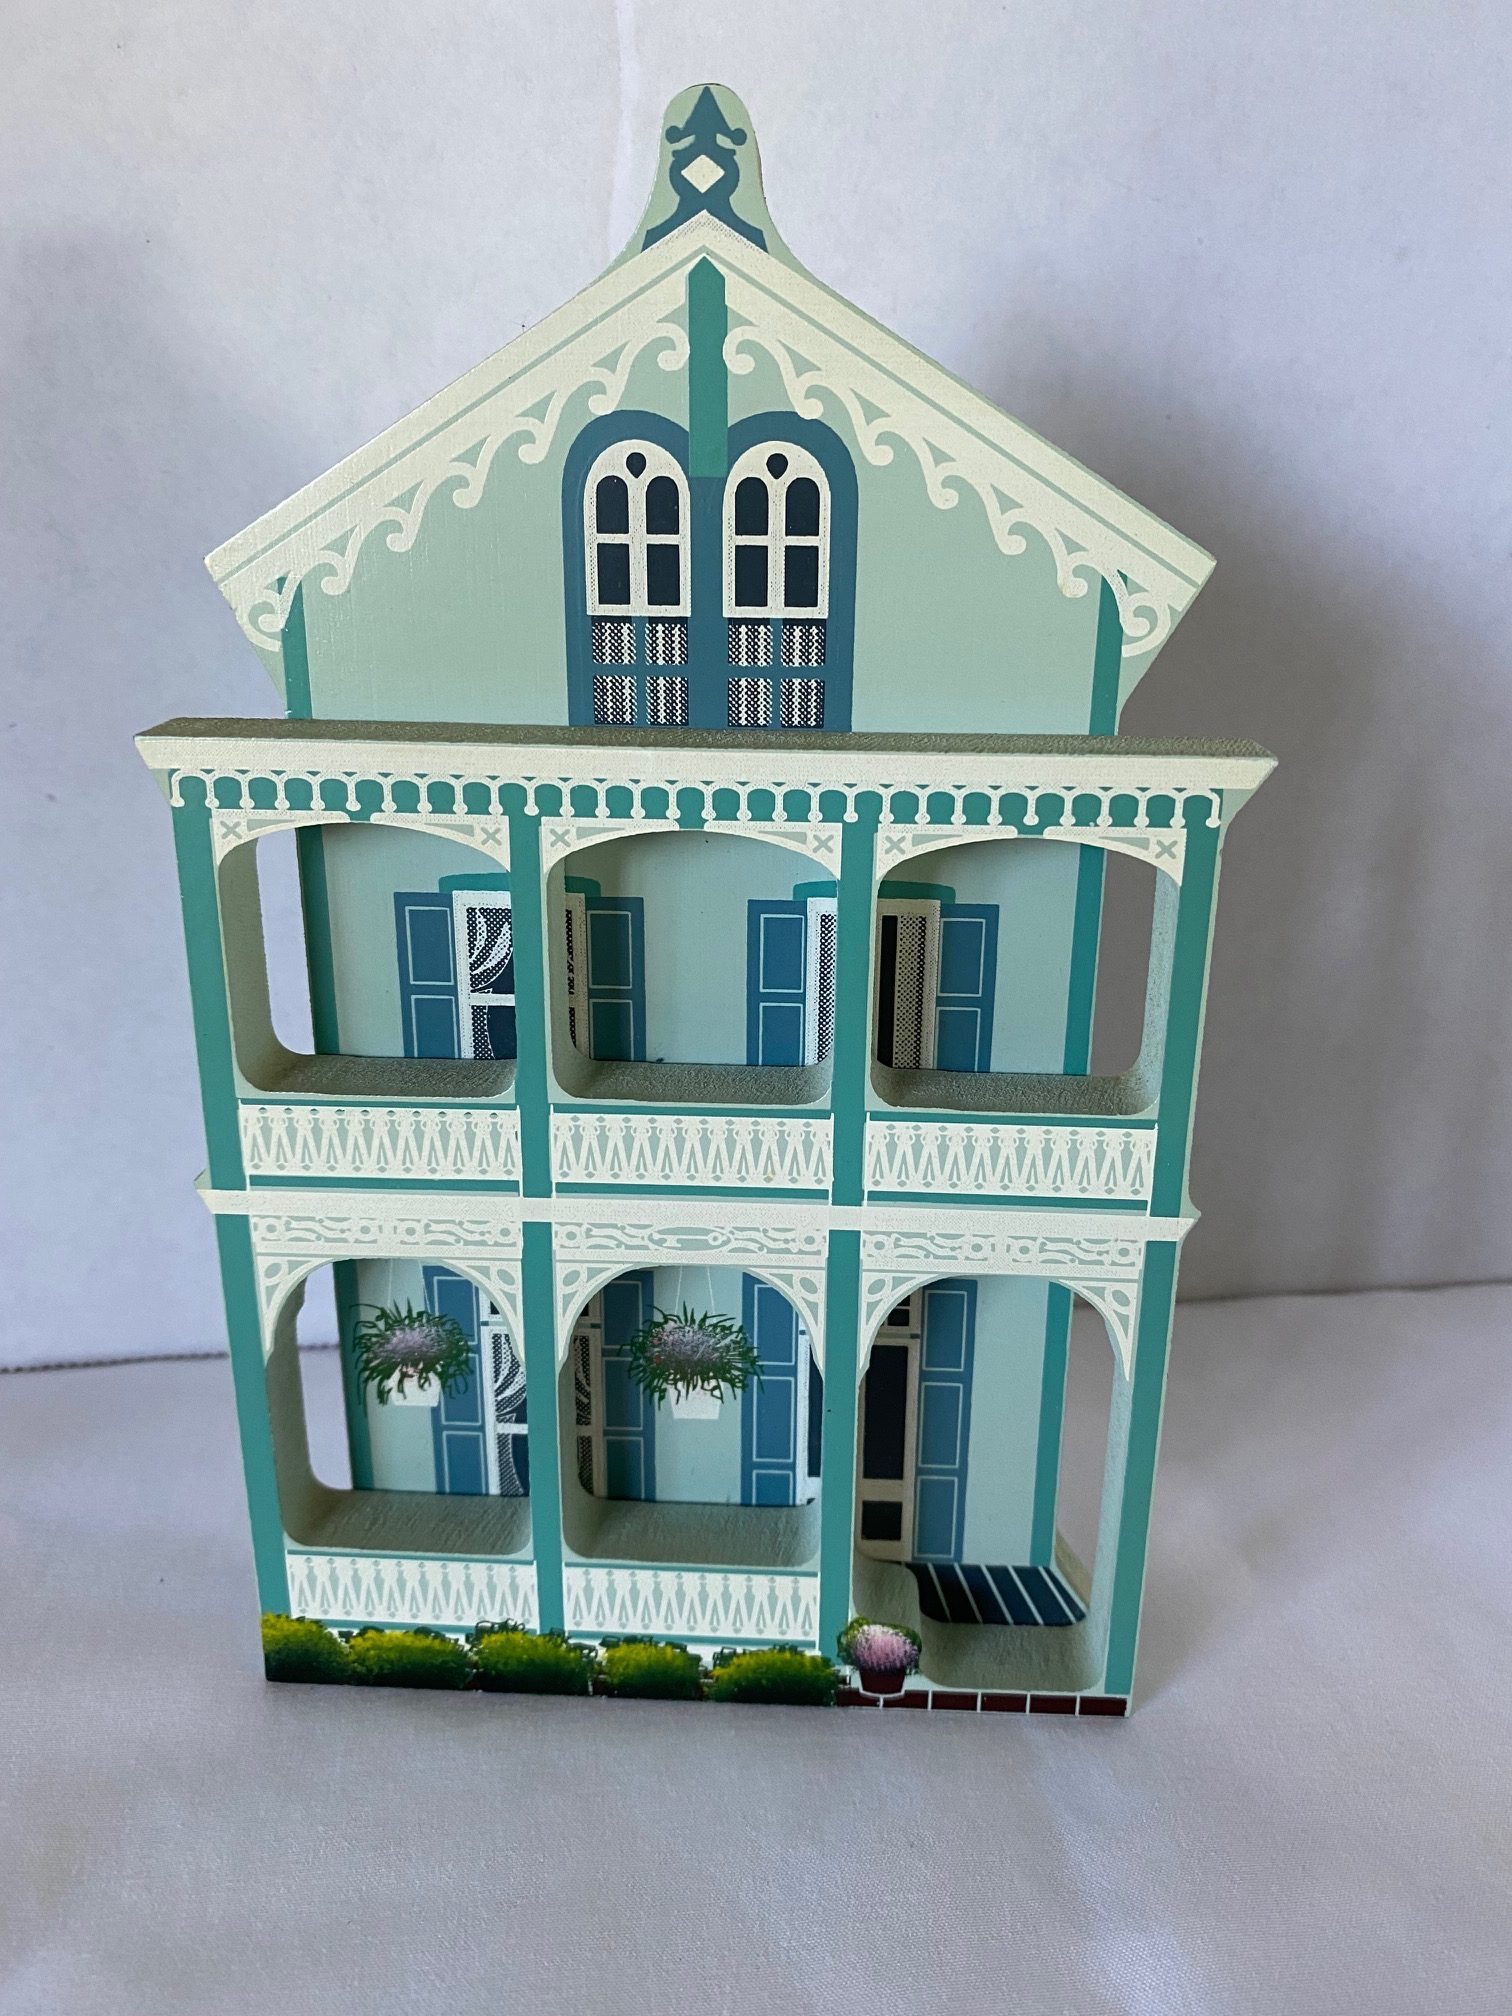 Sheila’s Collectable Wooden Hand Painted Shelf Sitters “Steiner Cottage” 1995